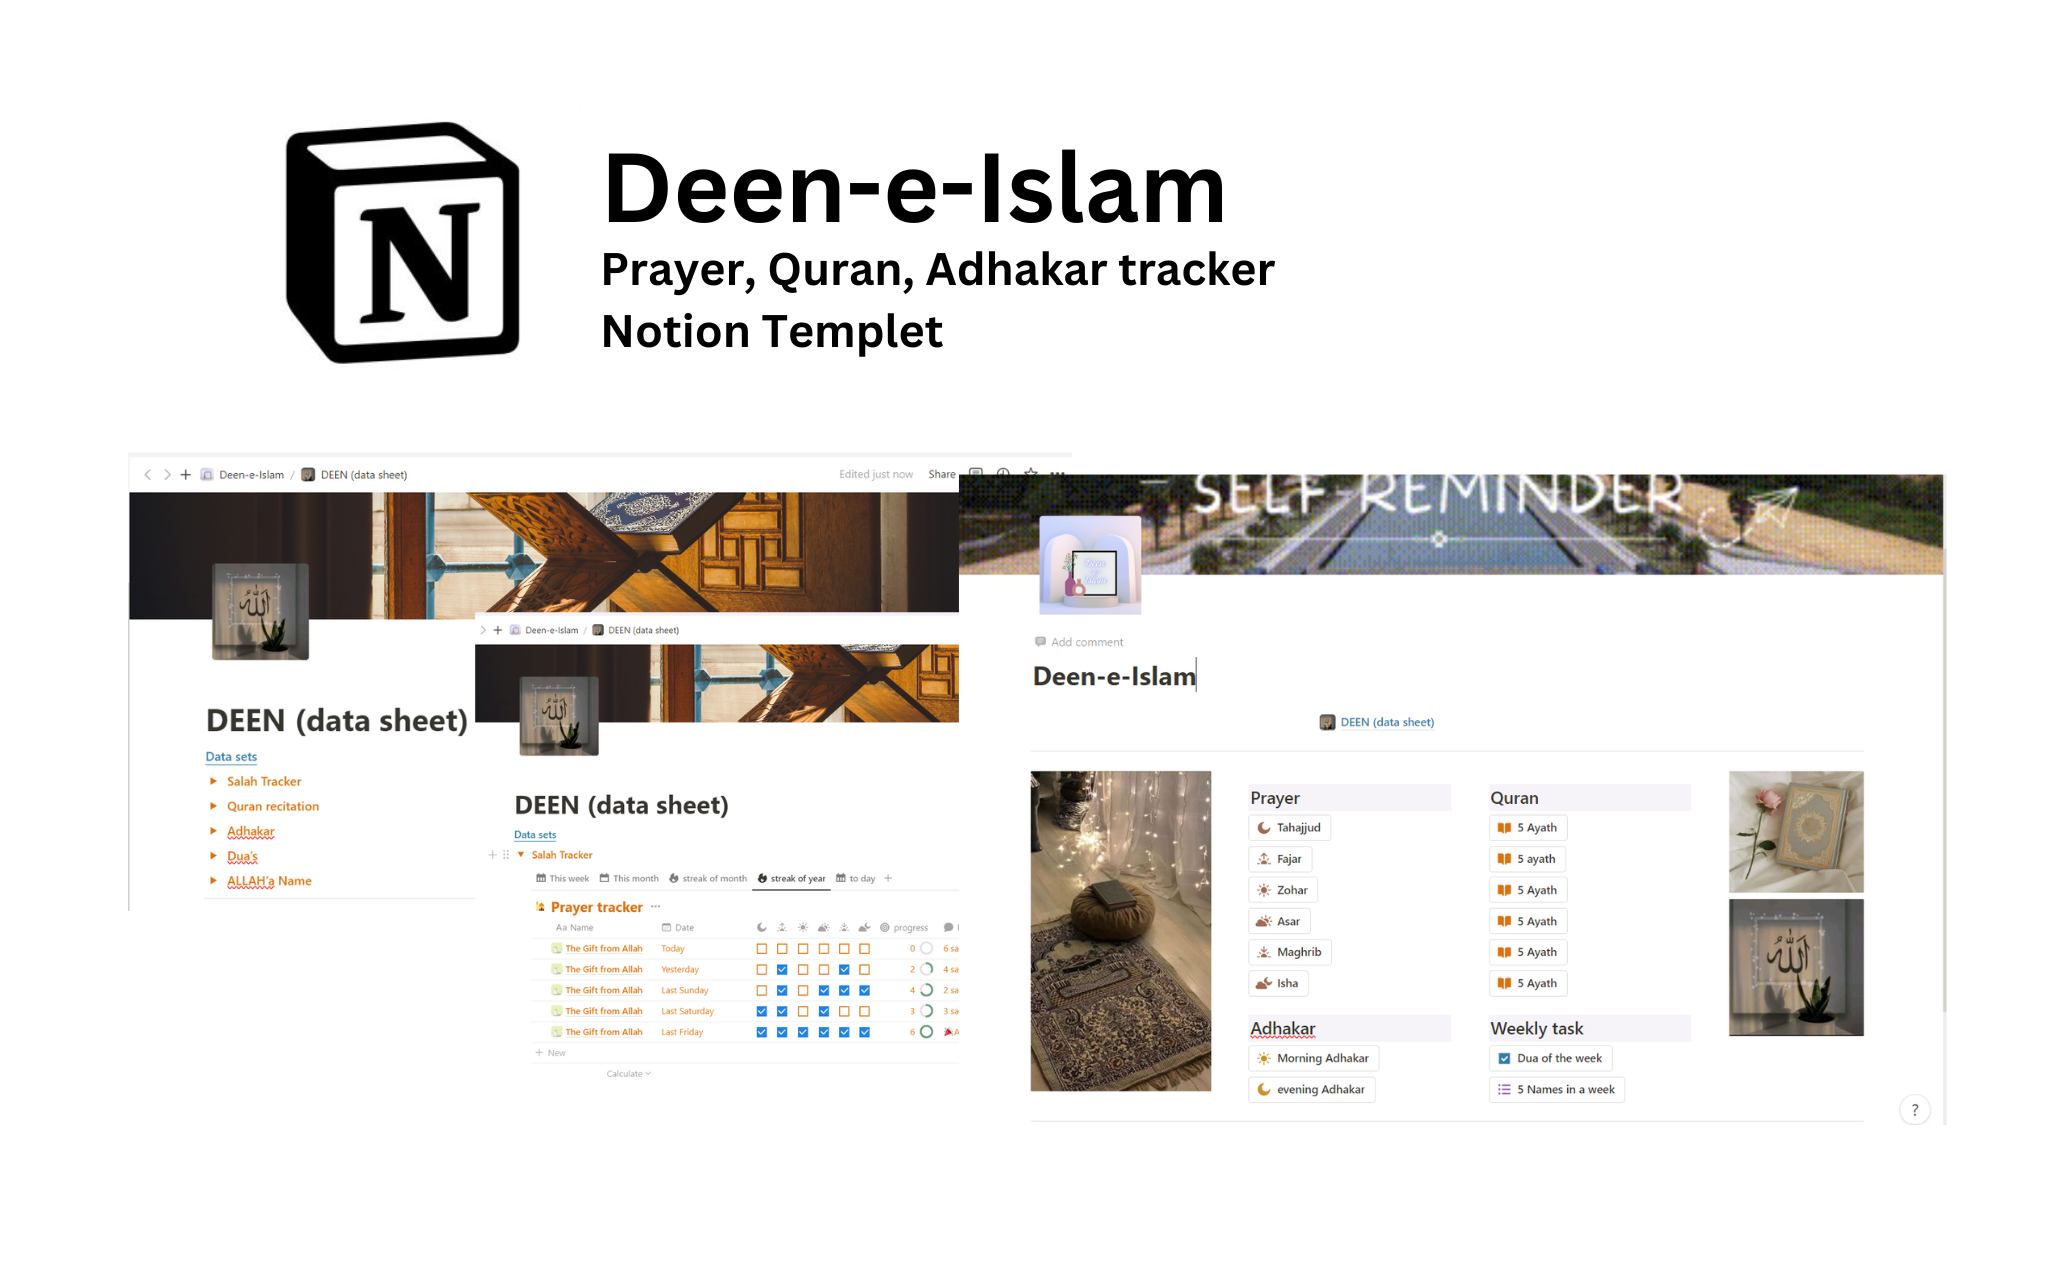 This template helps in tracking your Deen/Islamic/spiritual goals.